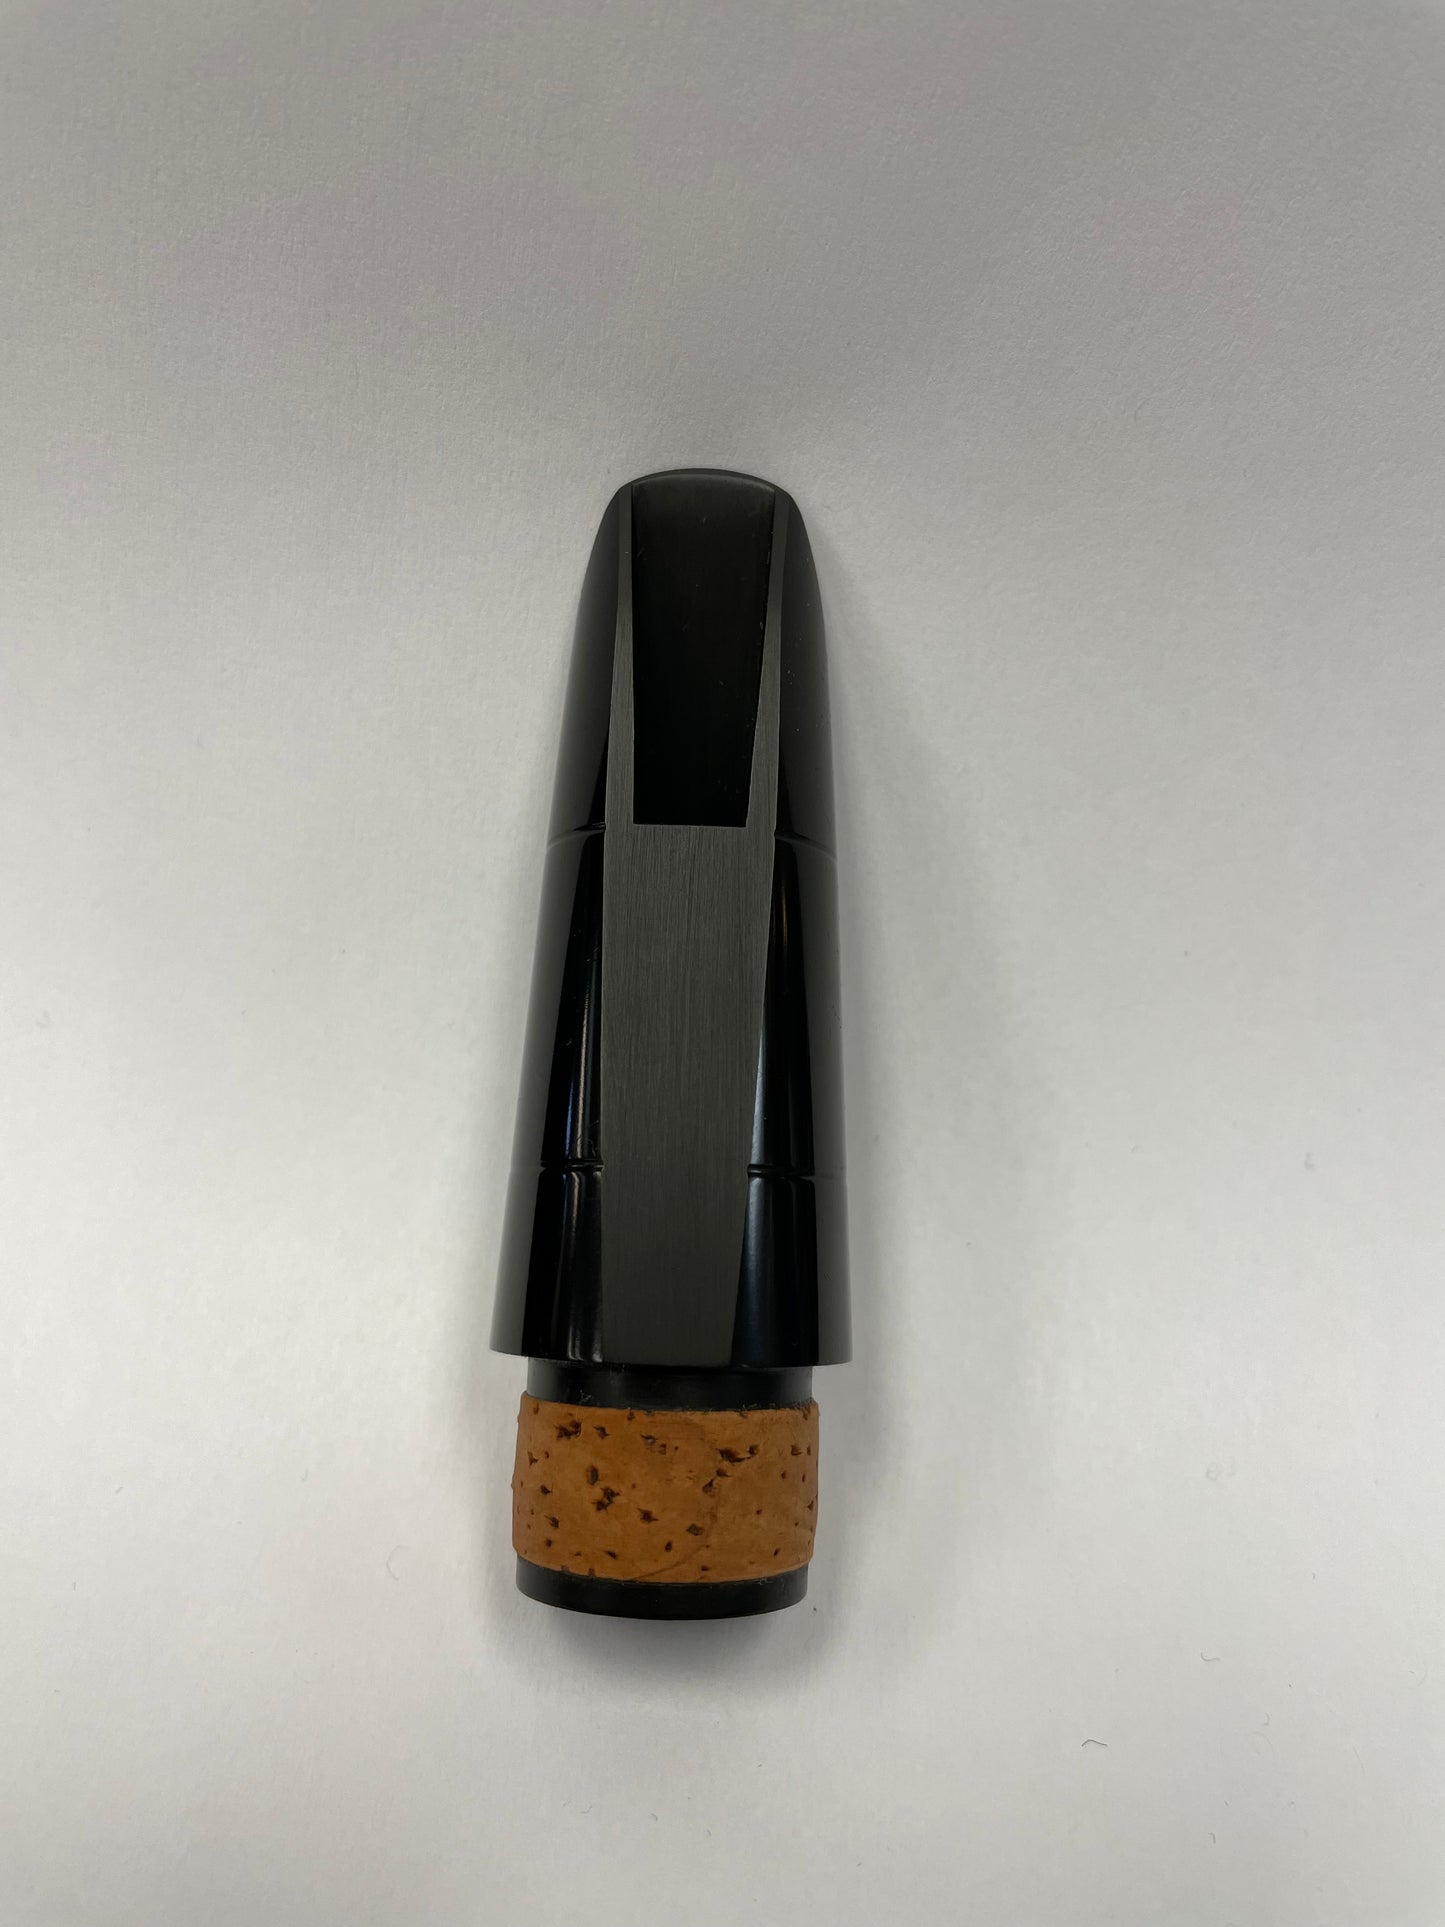 Pre-Owned Selmer C85 Bb Clarinet Mouthpiece